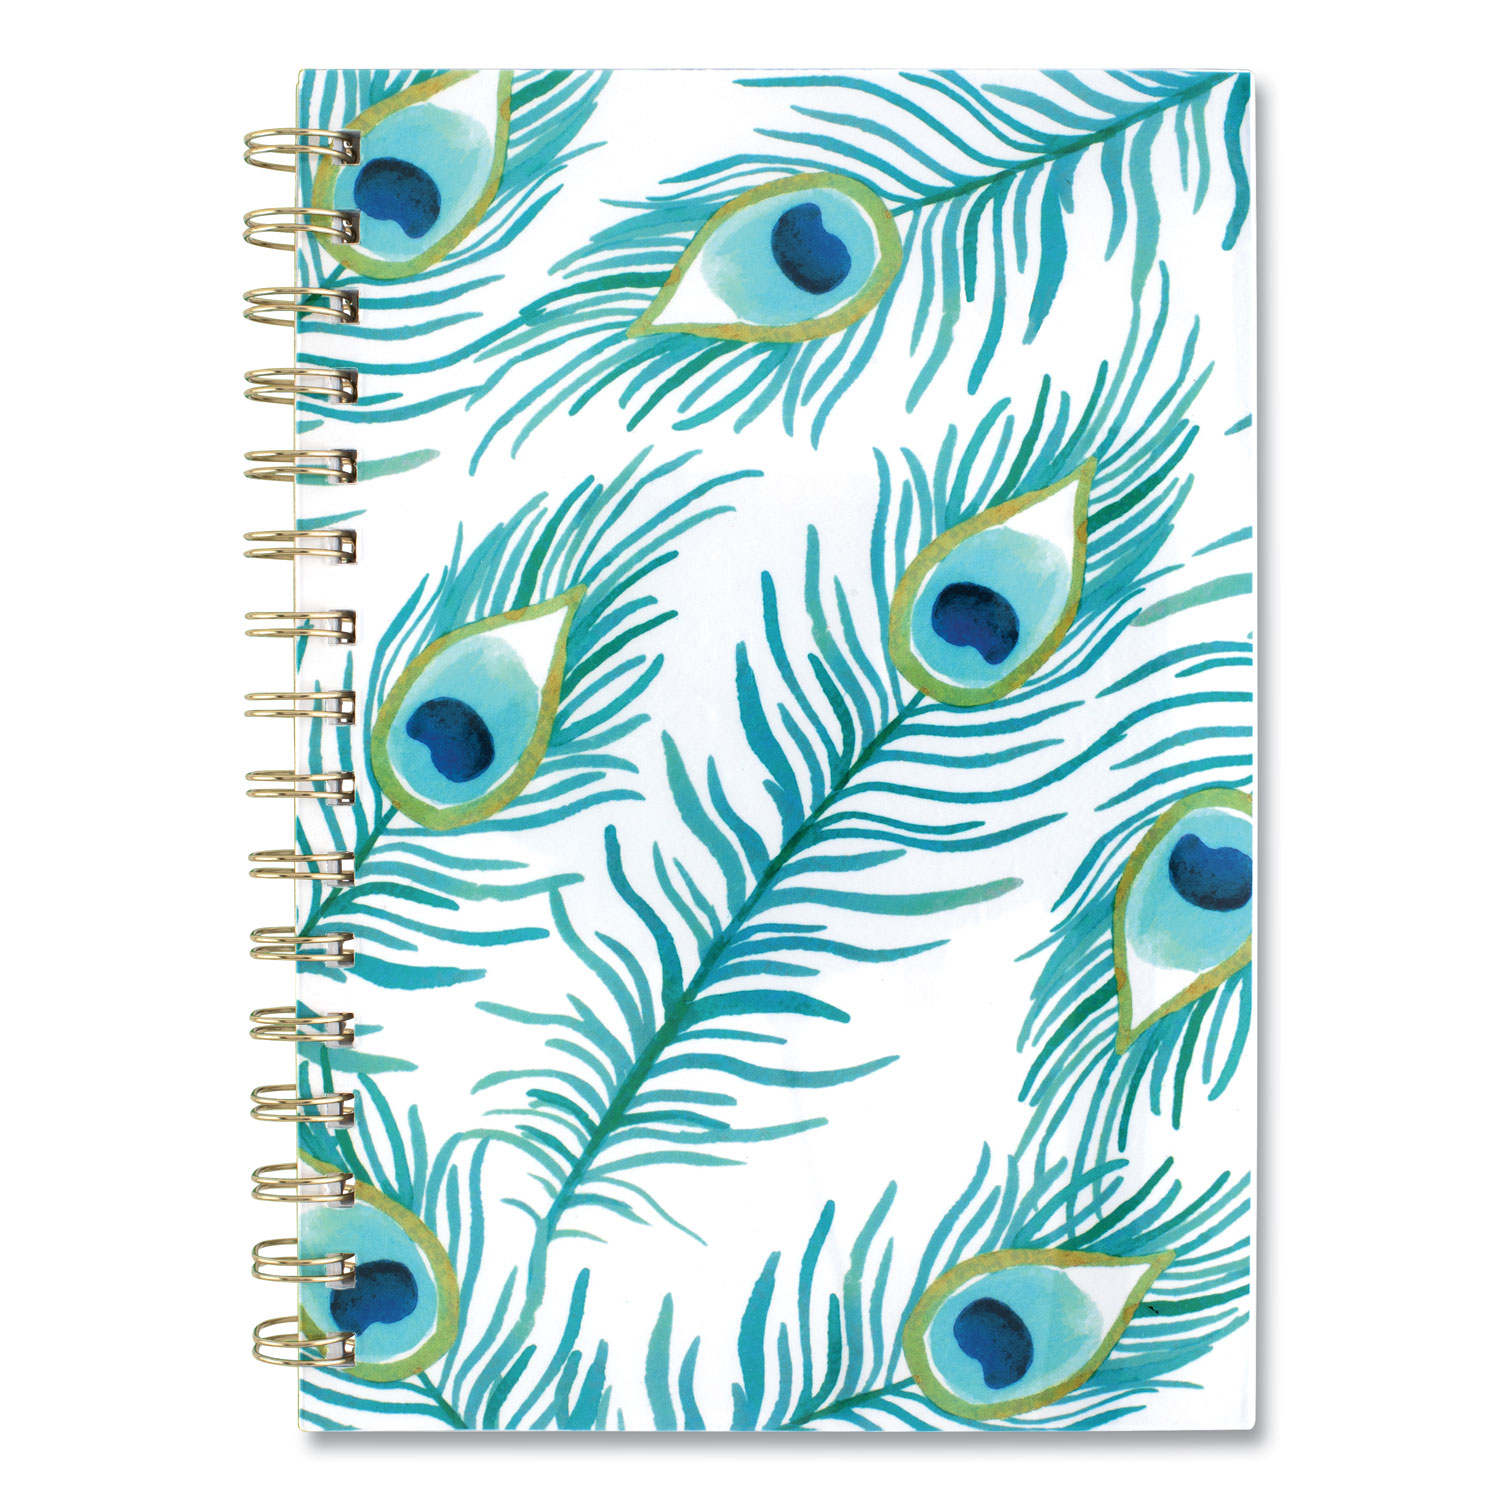  Cambridge 1453200 Peacock Weekly/Monthly Planner, 8.5 x 5.5, White/Green/Blue, 2021 (AAG1453200) 